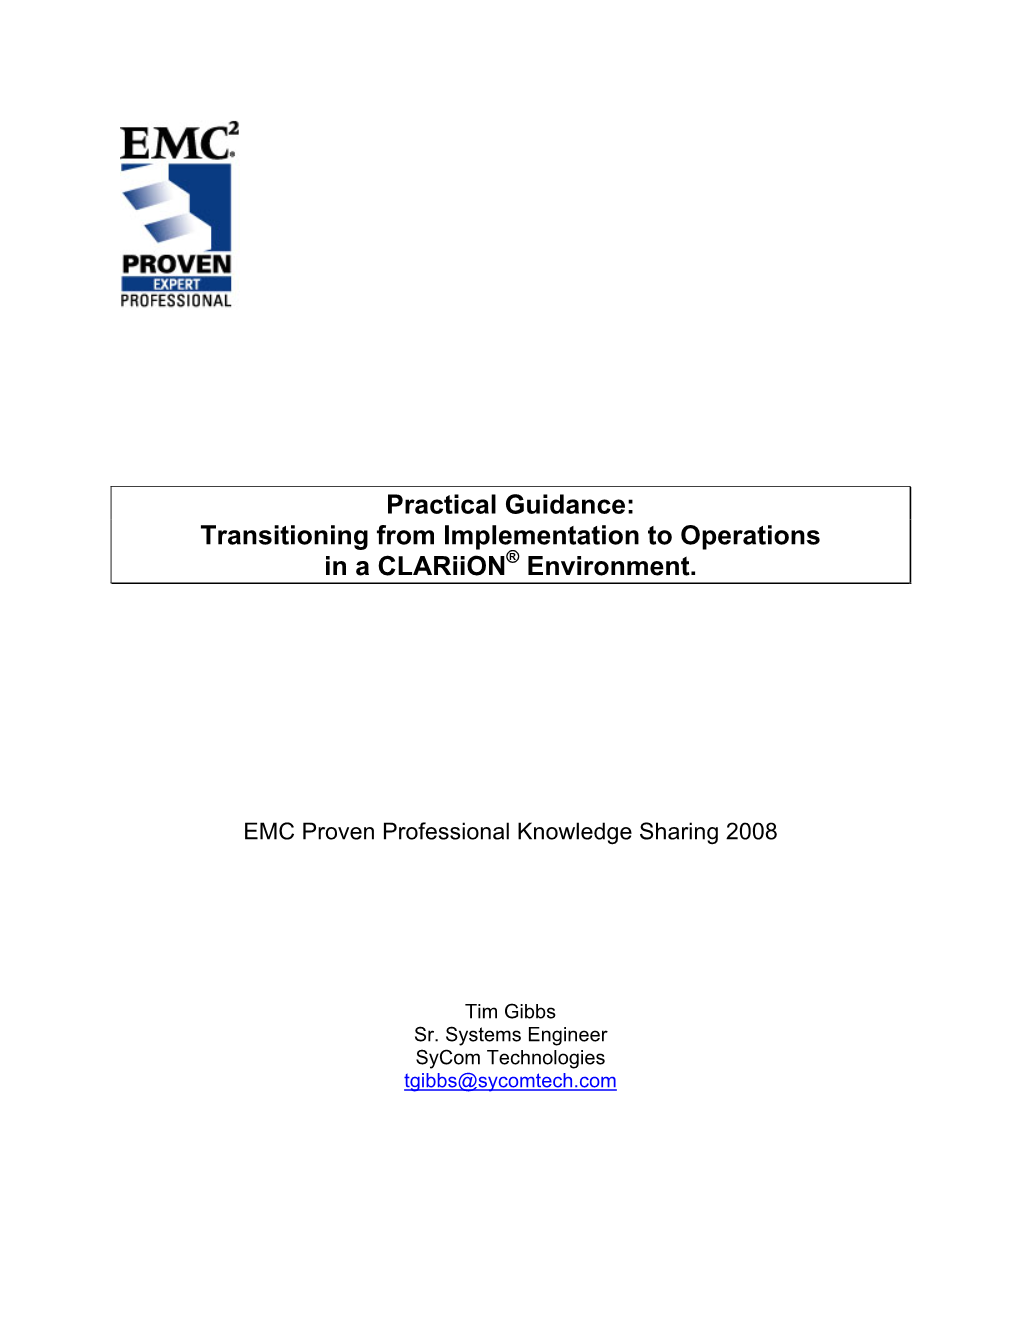 Practical Guidance: Transitioning from Implementation to Operations in a Clariion® Environment